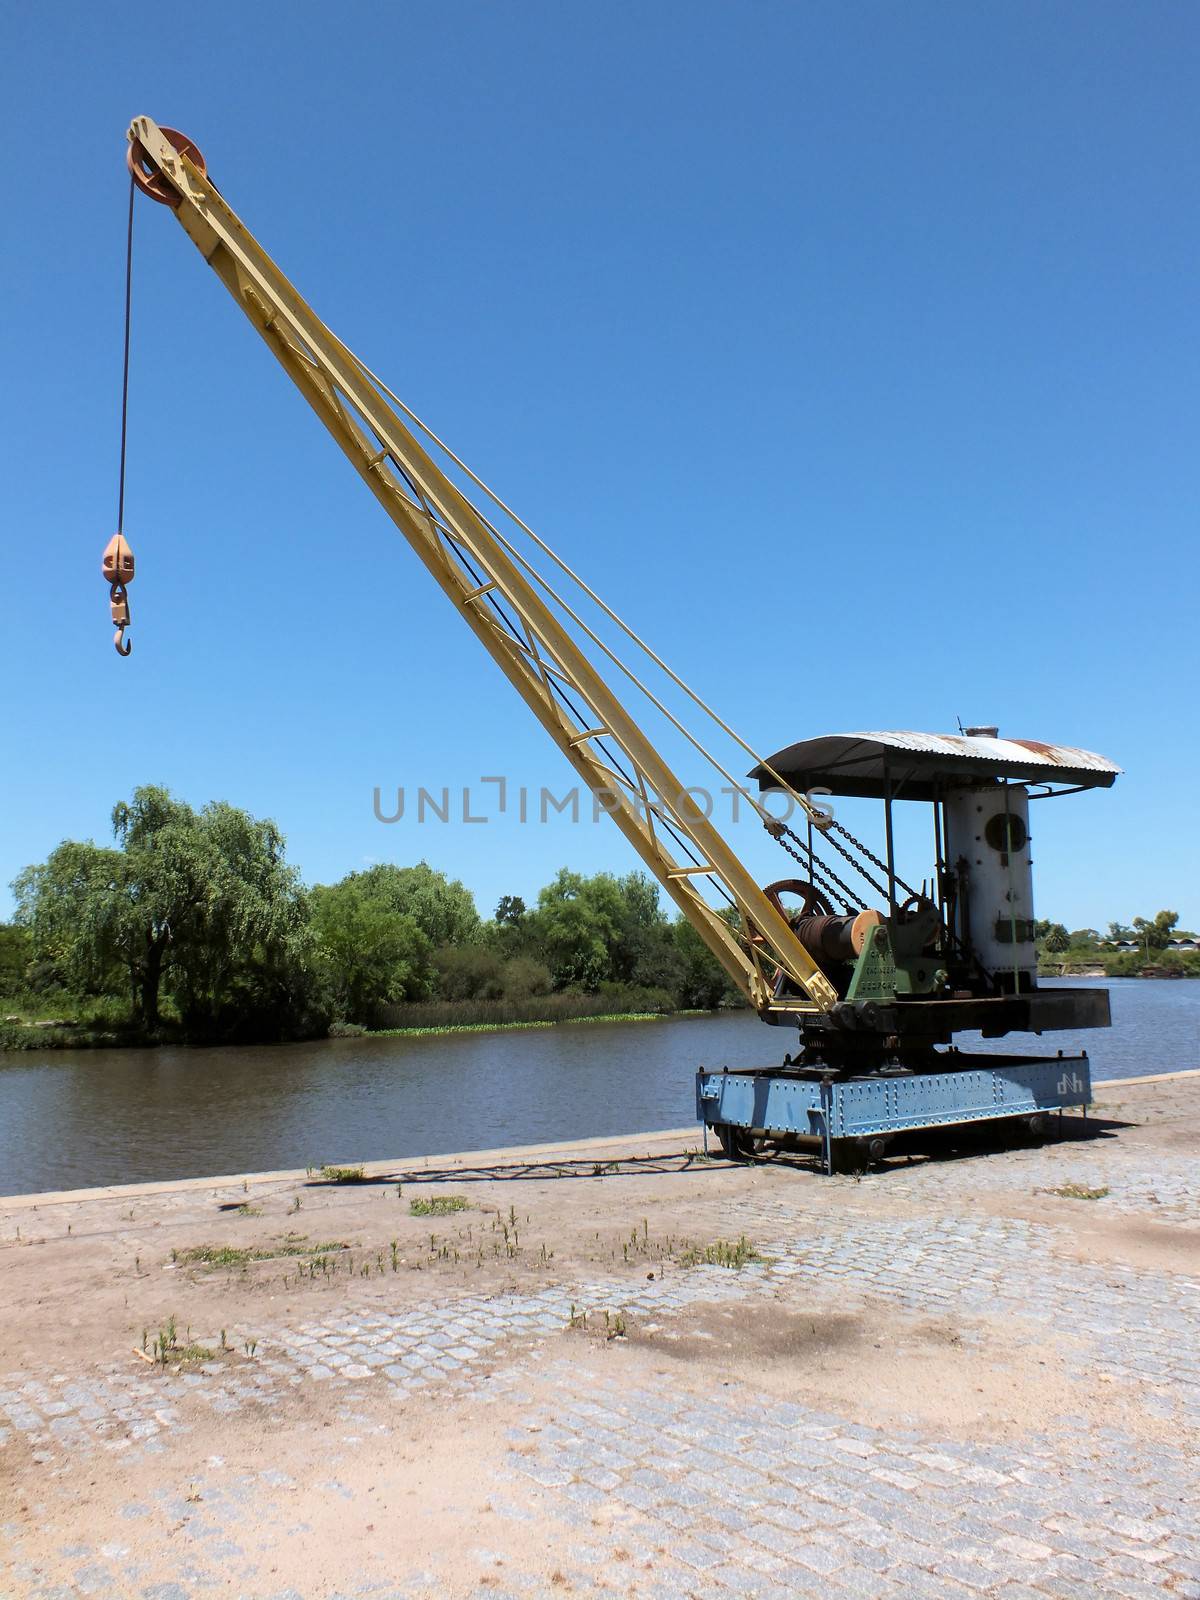 This steam crane is situated on the waterfront of the Arroya de las Vacas in Carmelos small riverside port. The crane was built by Grafton & Co of Bedford, England